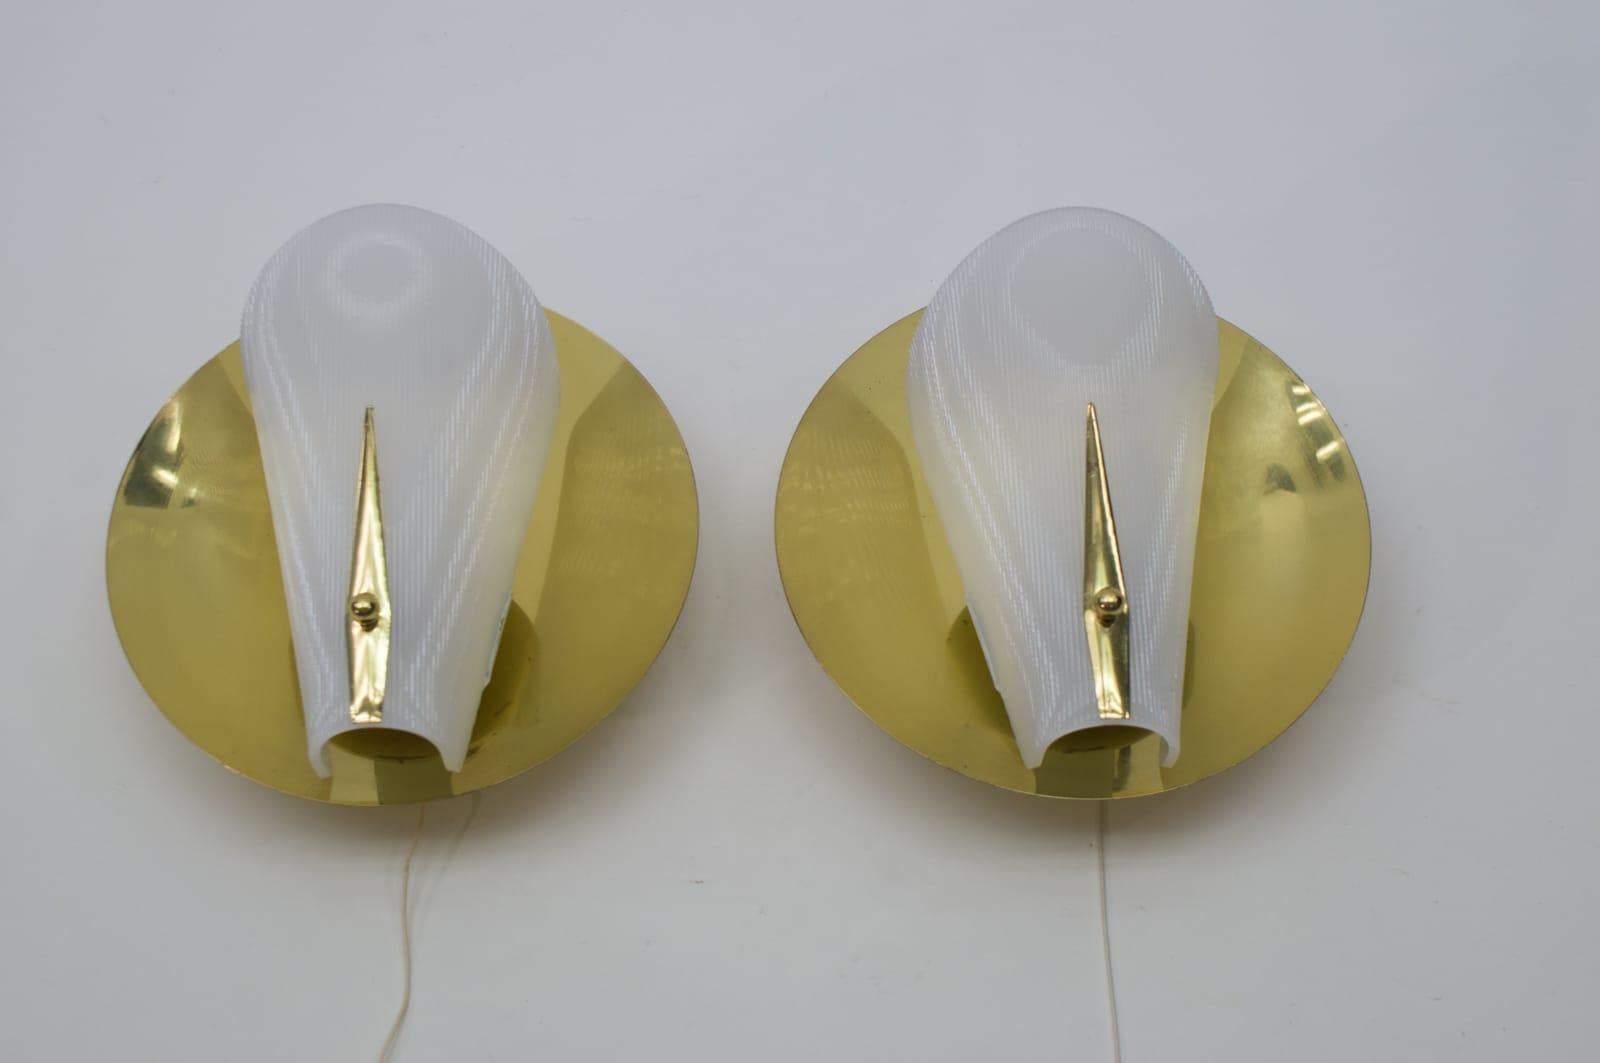 Set of Two Mid-Century Modern Brass Wall Lamps or Sconces, 1950s For Sale 4